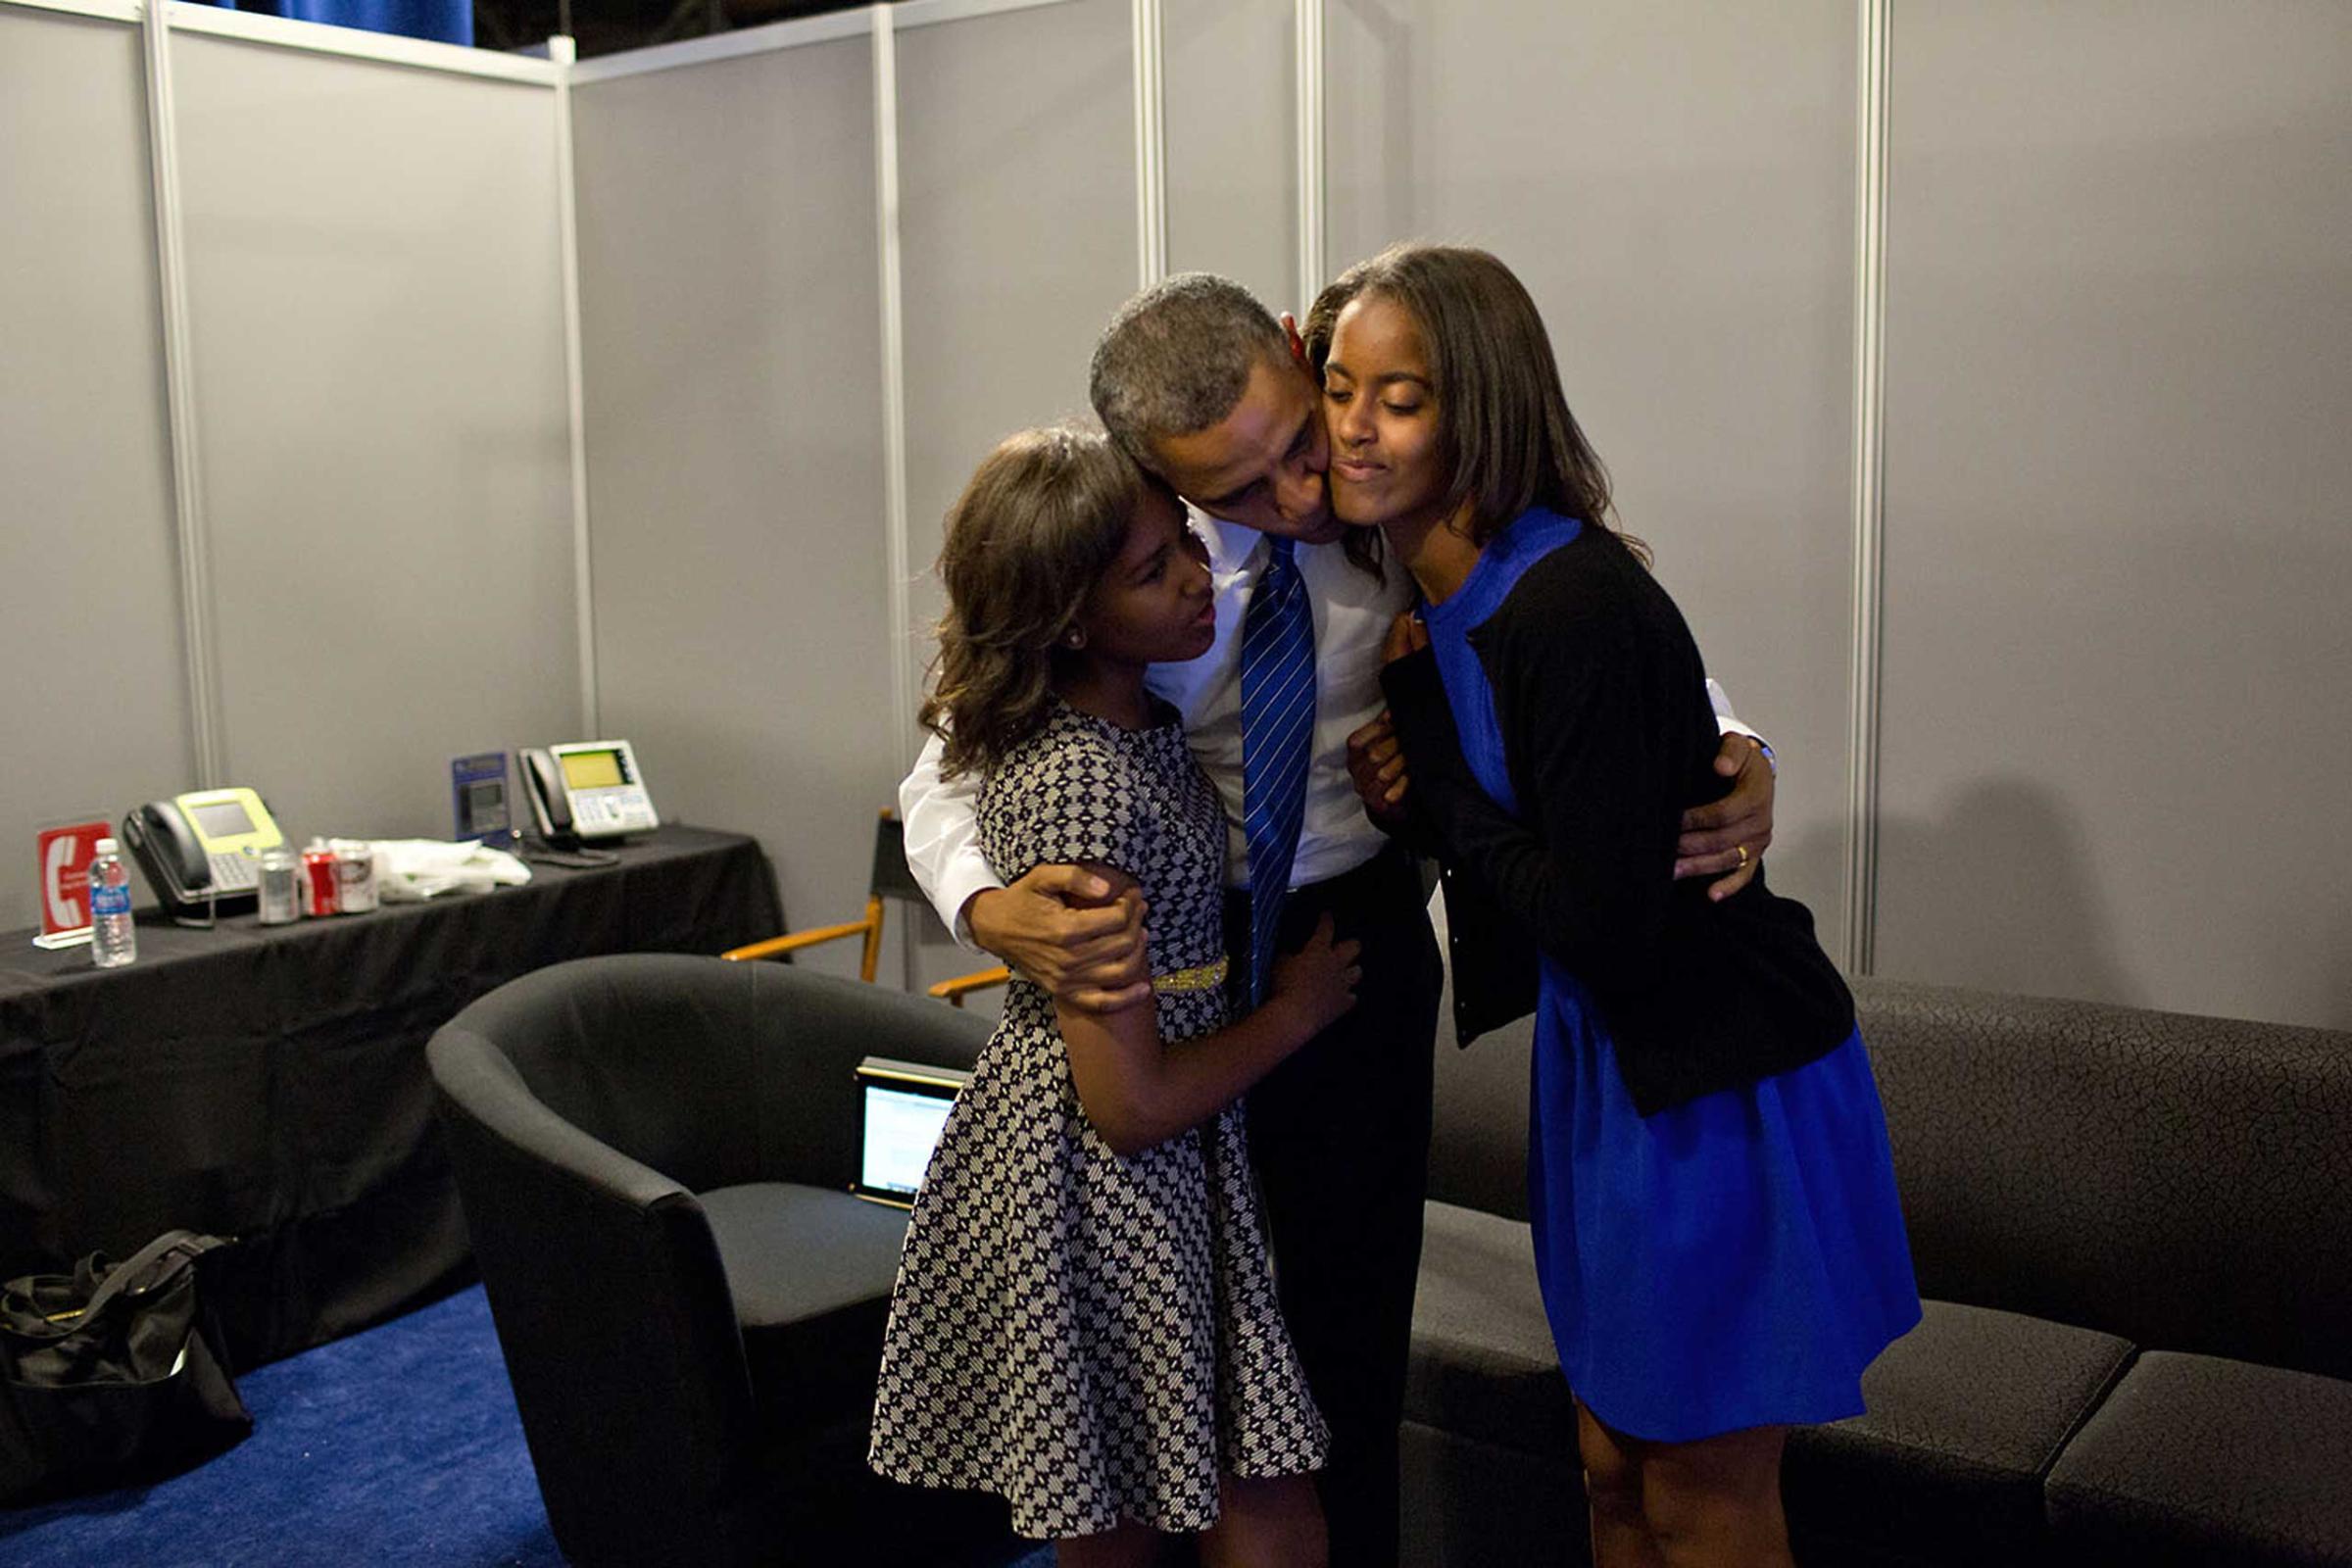 President Obama greets daughters Sasha and Malia at the Time Warner Cable Arena before delivering remarks at the Democratic National Convention in Charlotte, N.C., Sept. 6, 2012.